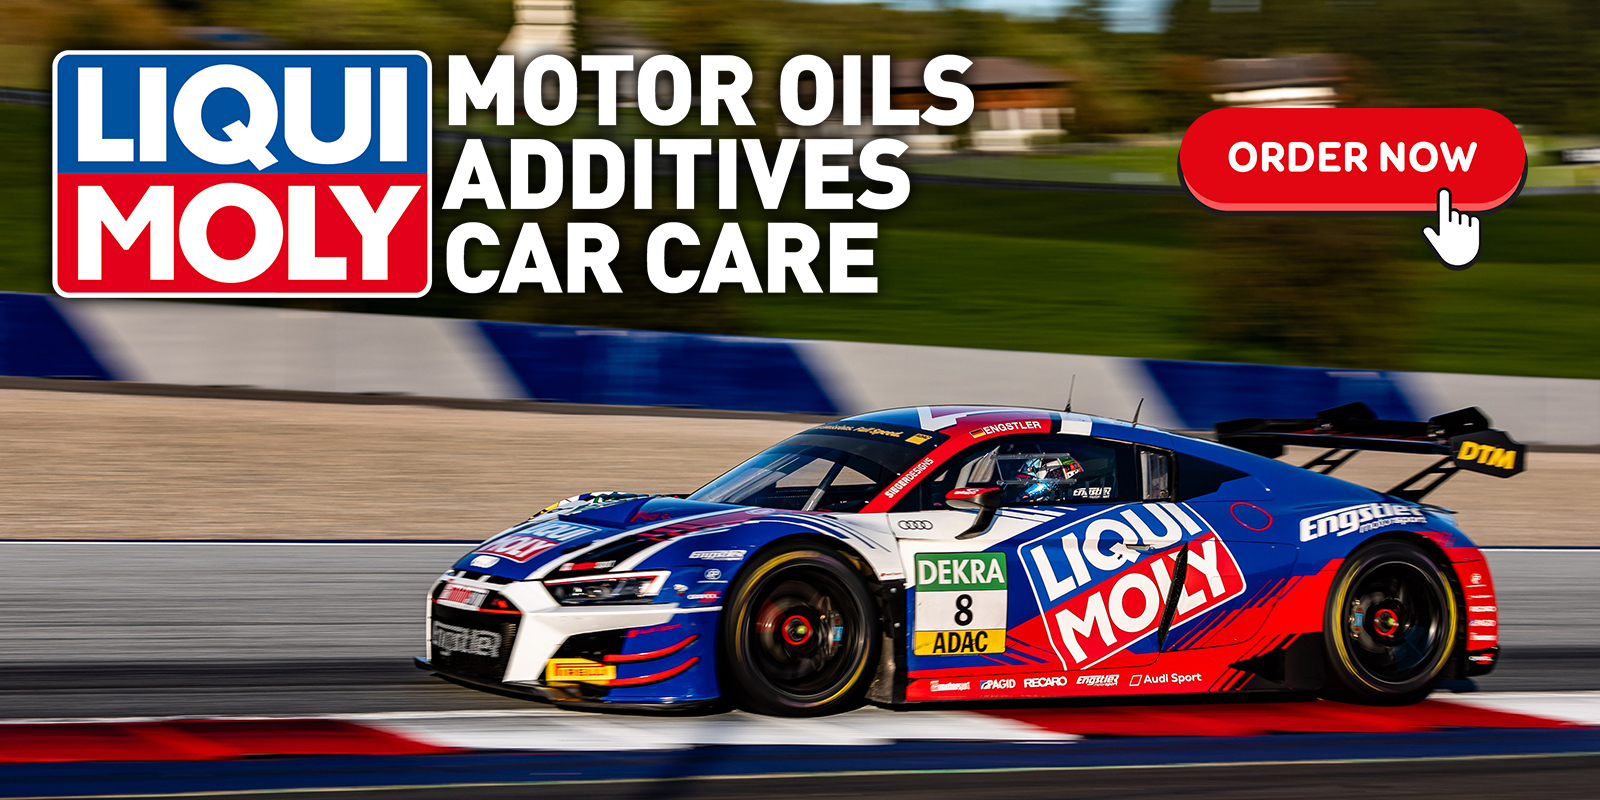 Liqui Moly Motor Oil Additives Made in Germany